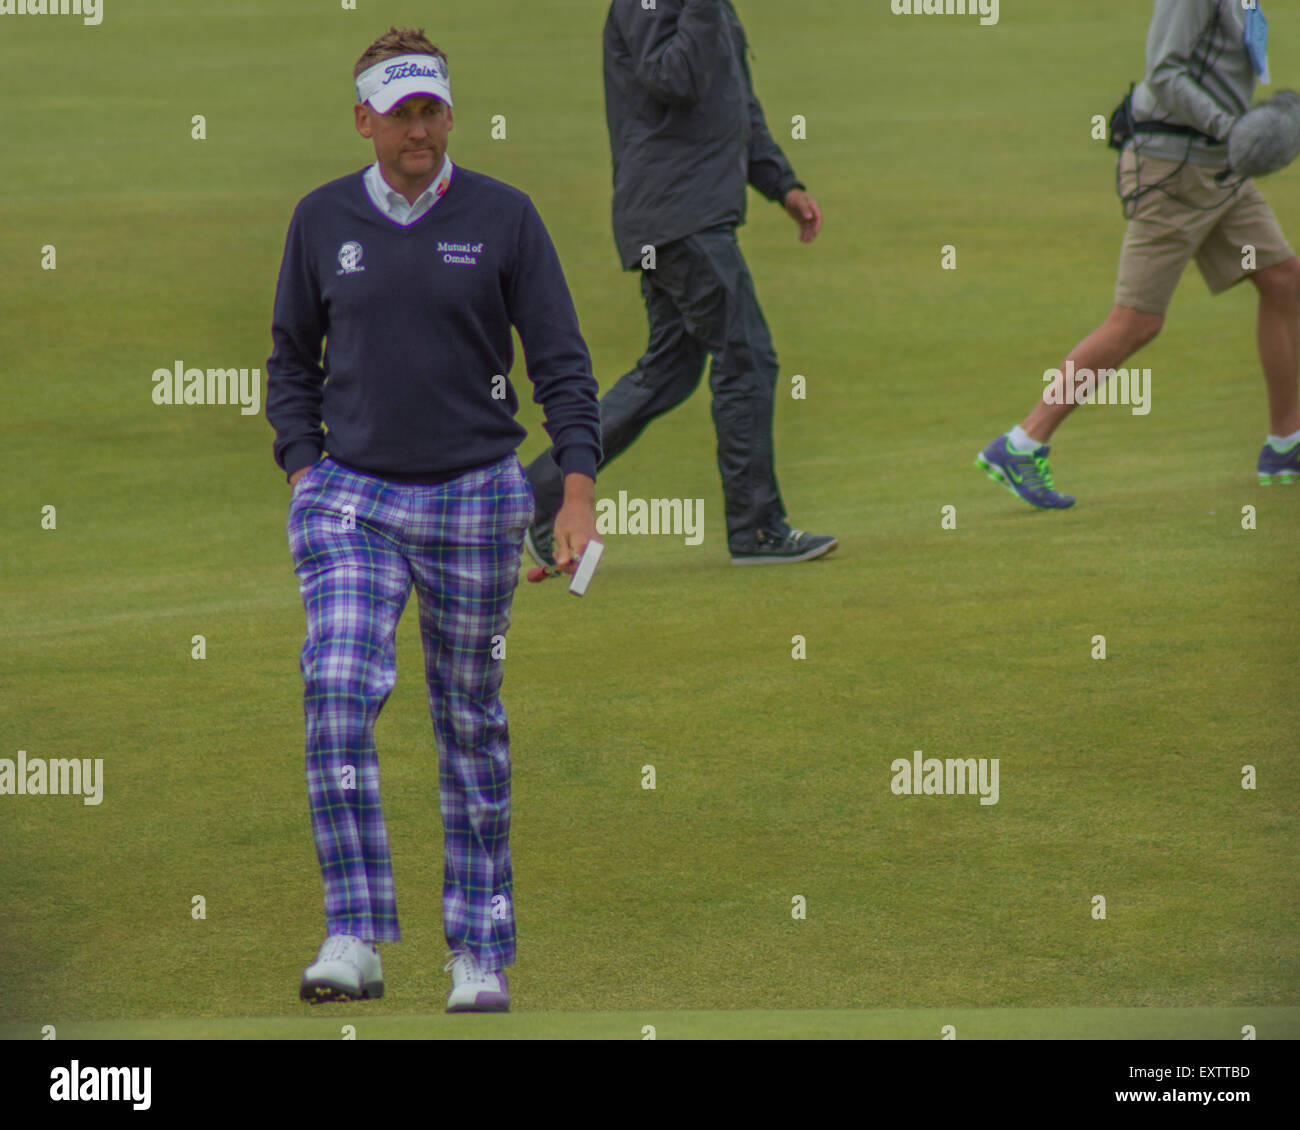 St Andrews, Fife, Scotland, UK. 16th July, 2015. Ian Poulter on the 18th green in the first round of the 144th British Golf Open, St Andrews, Fife, Scotland, UK. 16/07/2015 Credit:  Kirsty Robson/Alamy Live News Stock Photo